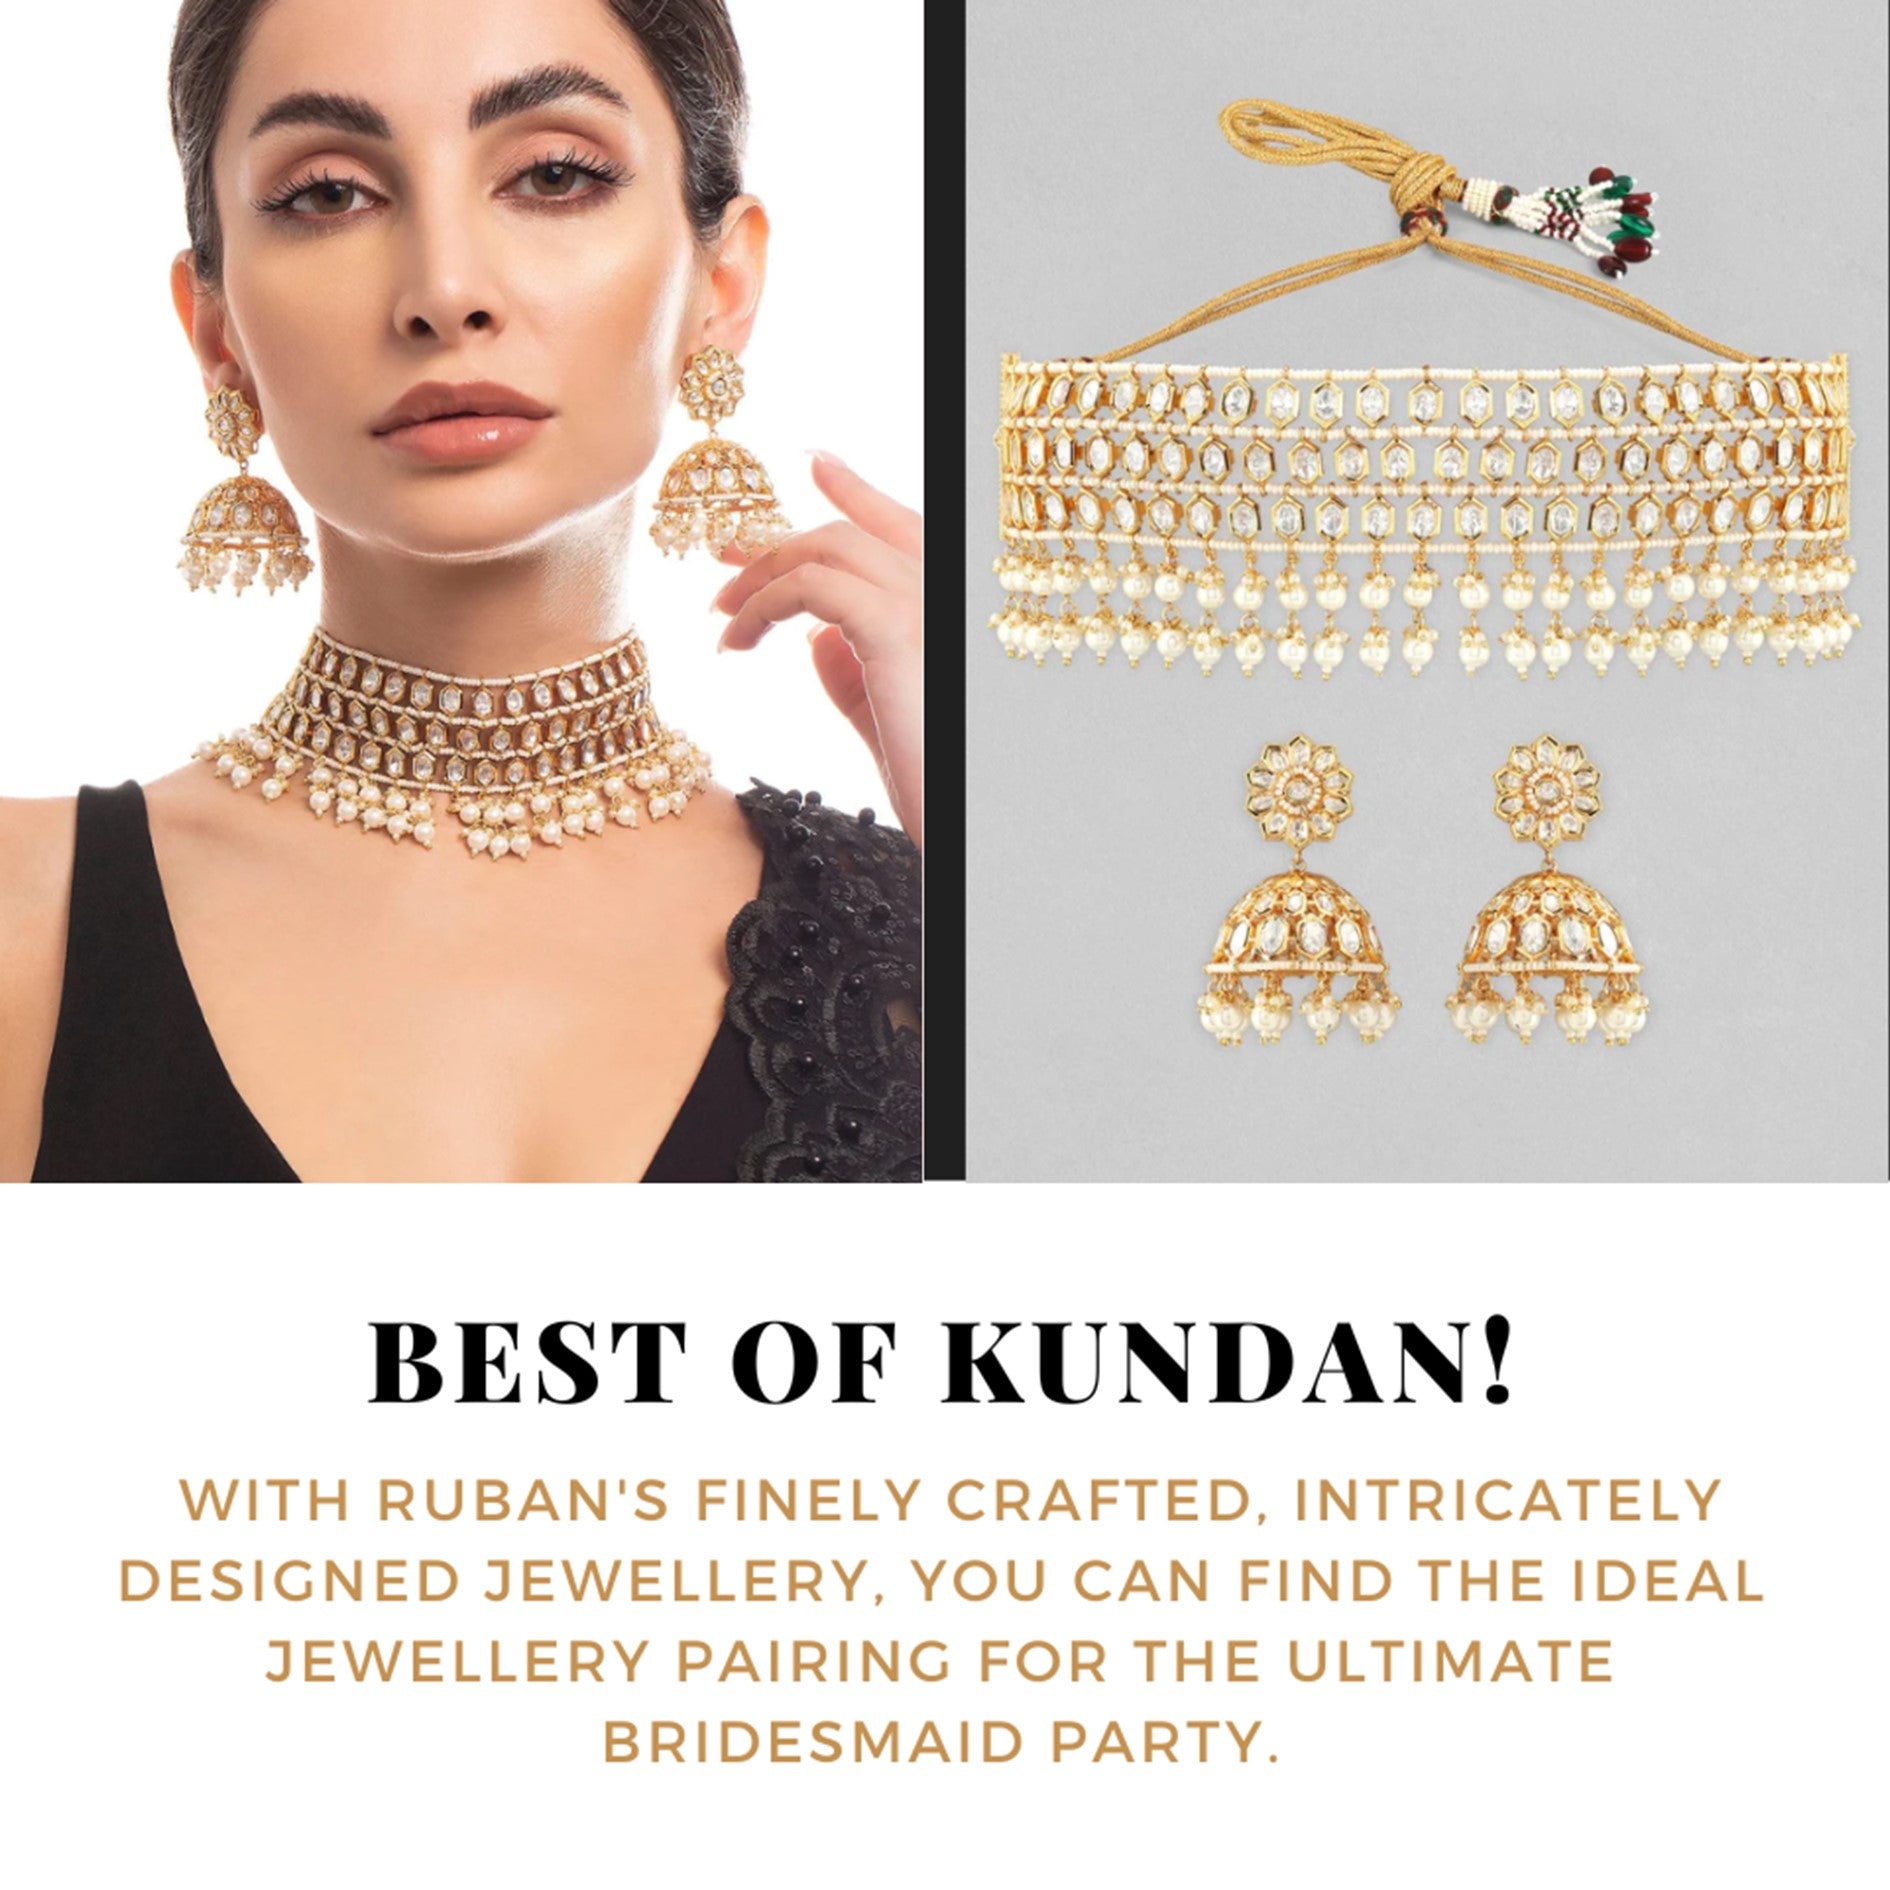 Best of Kundan jewellery for the ultimate bridesmaid party